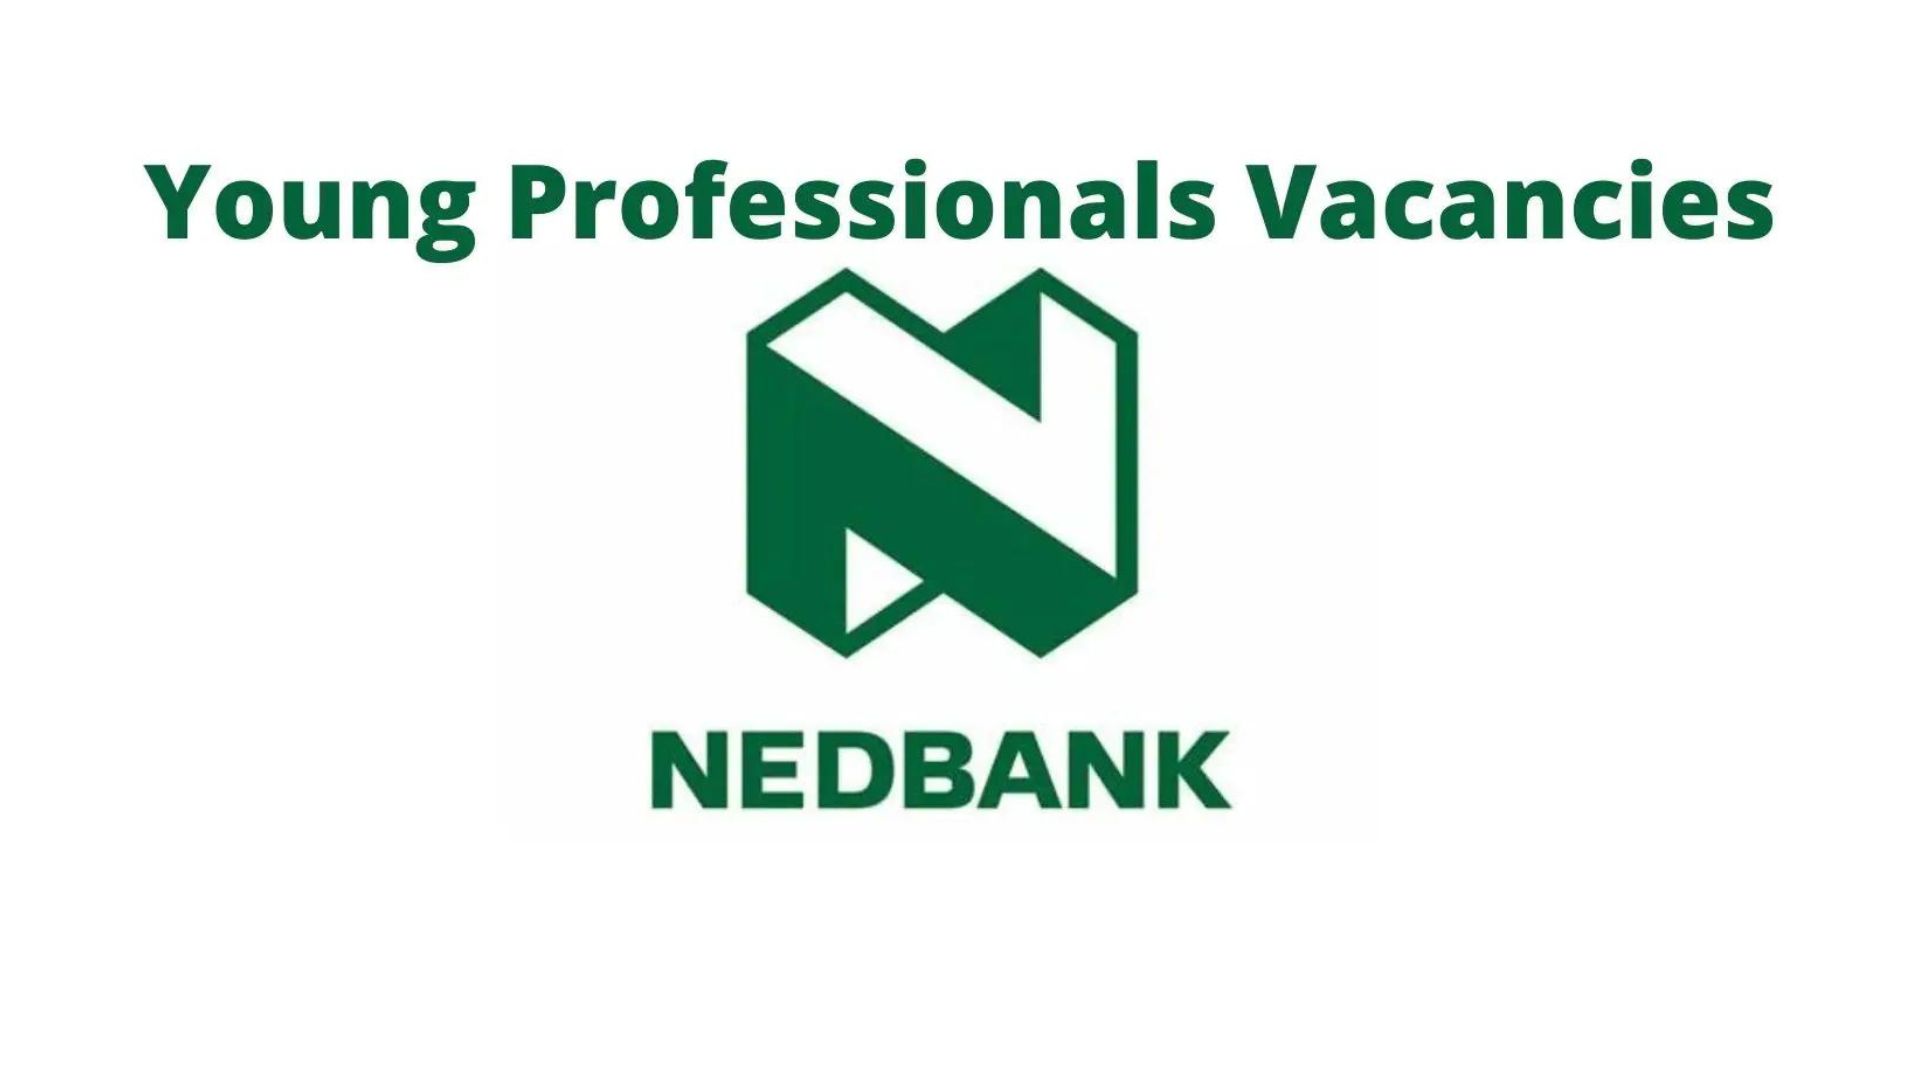 Client Services Consultant Needed Immediately at Nedbank